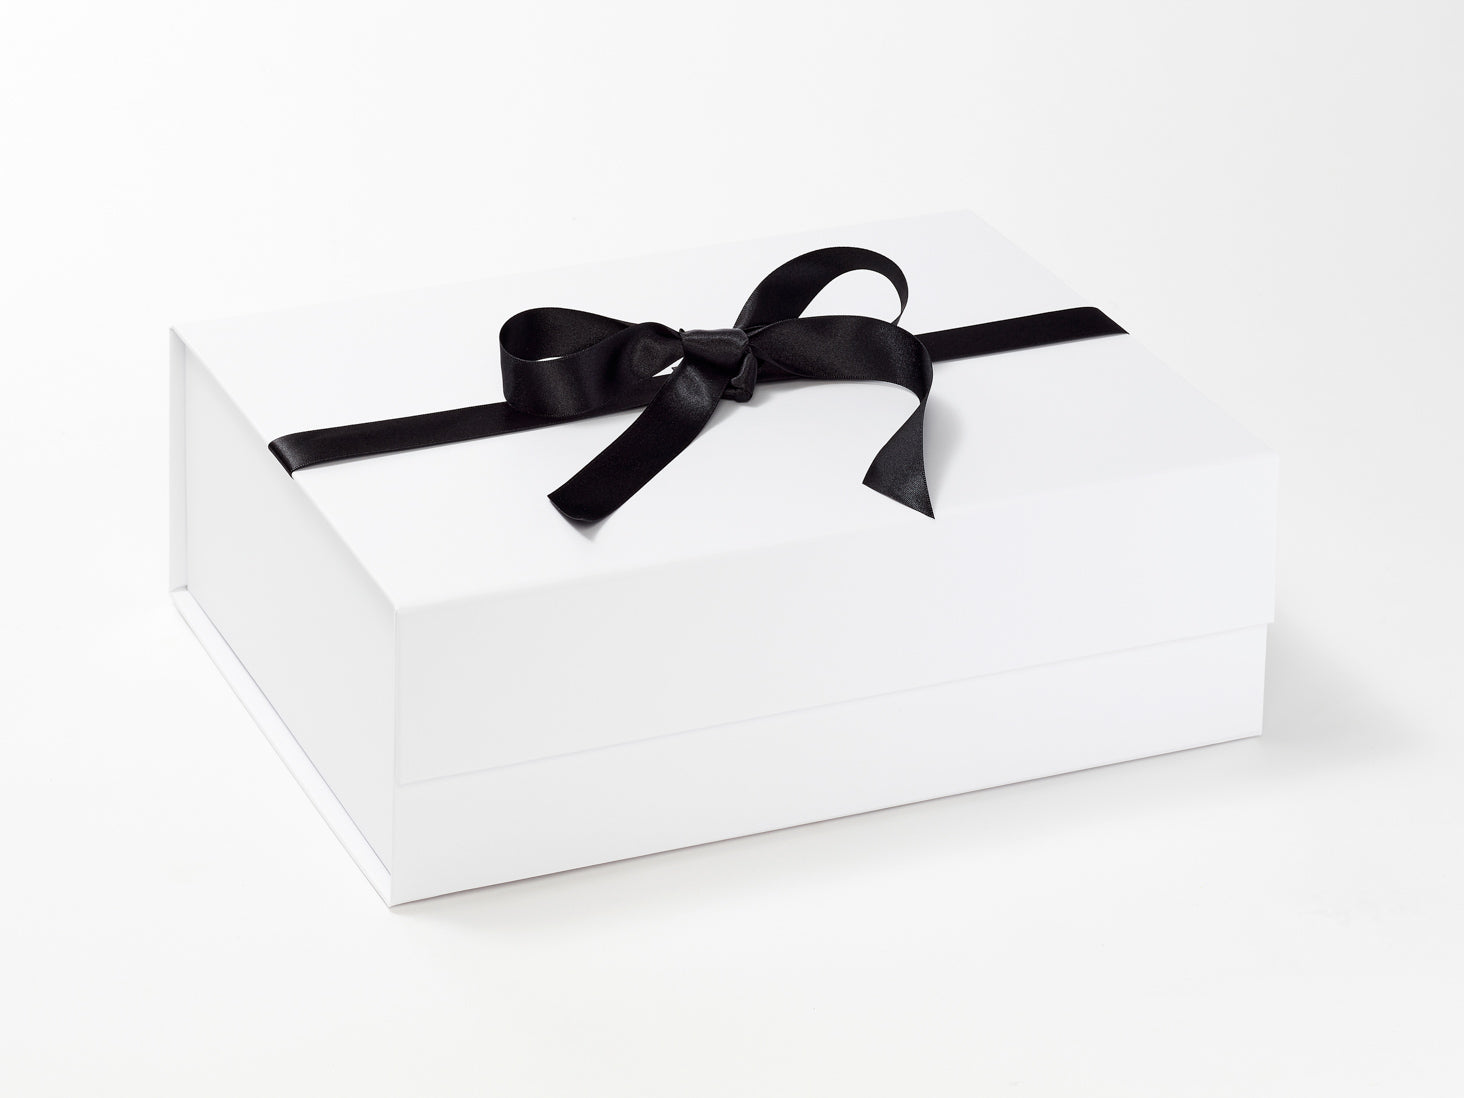 The different ways to tie ribbons from Foldabox